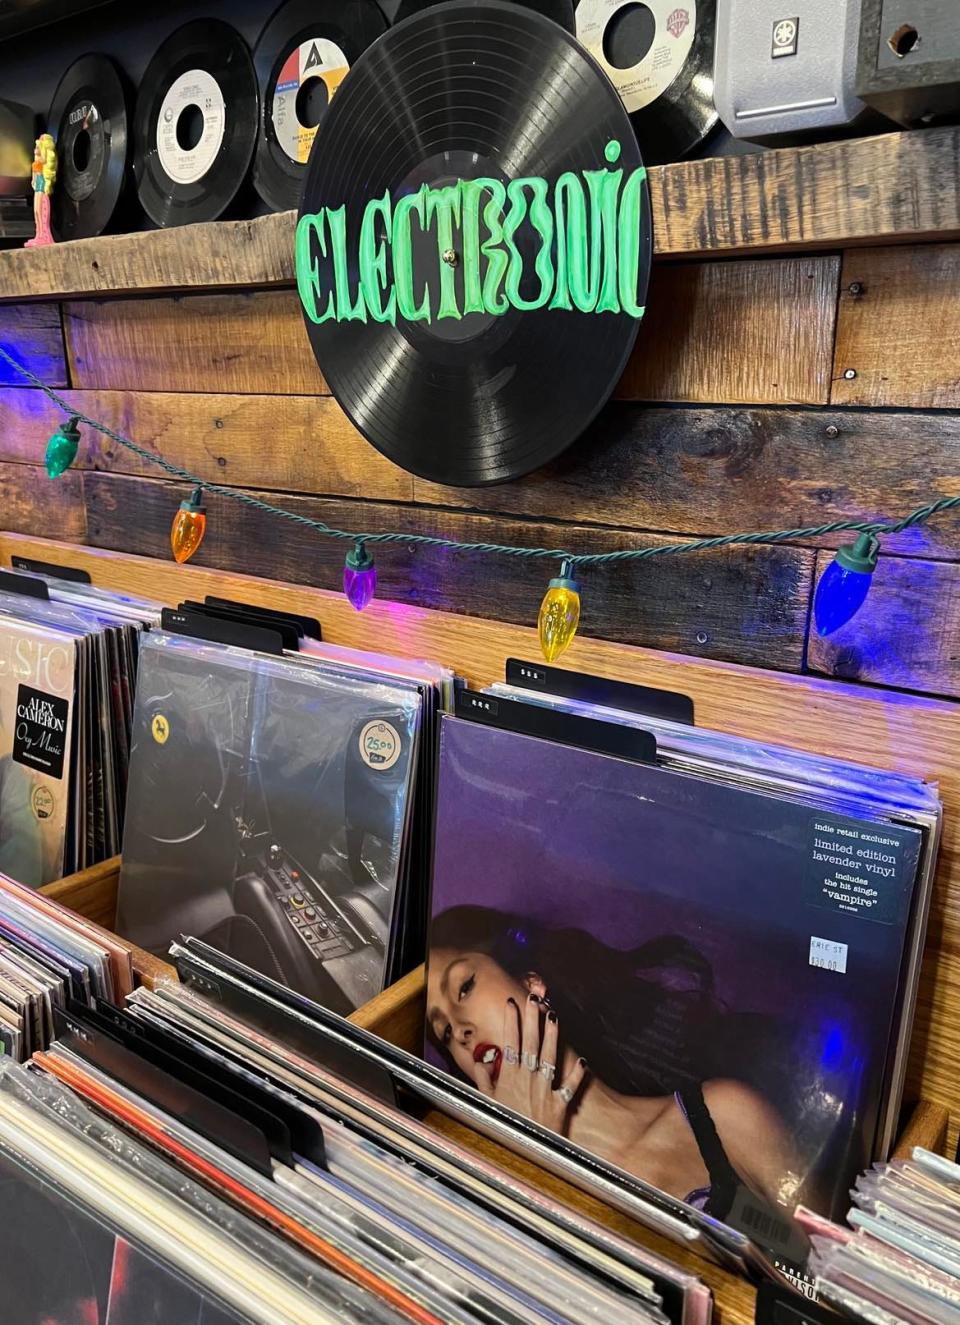 Vinyl releases from pop music artist Olivia Rodrigo are among the most popular at record stores like Erie St Vinyl and Quonset Hut in Stark County.